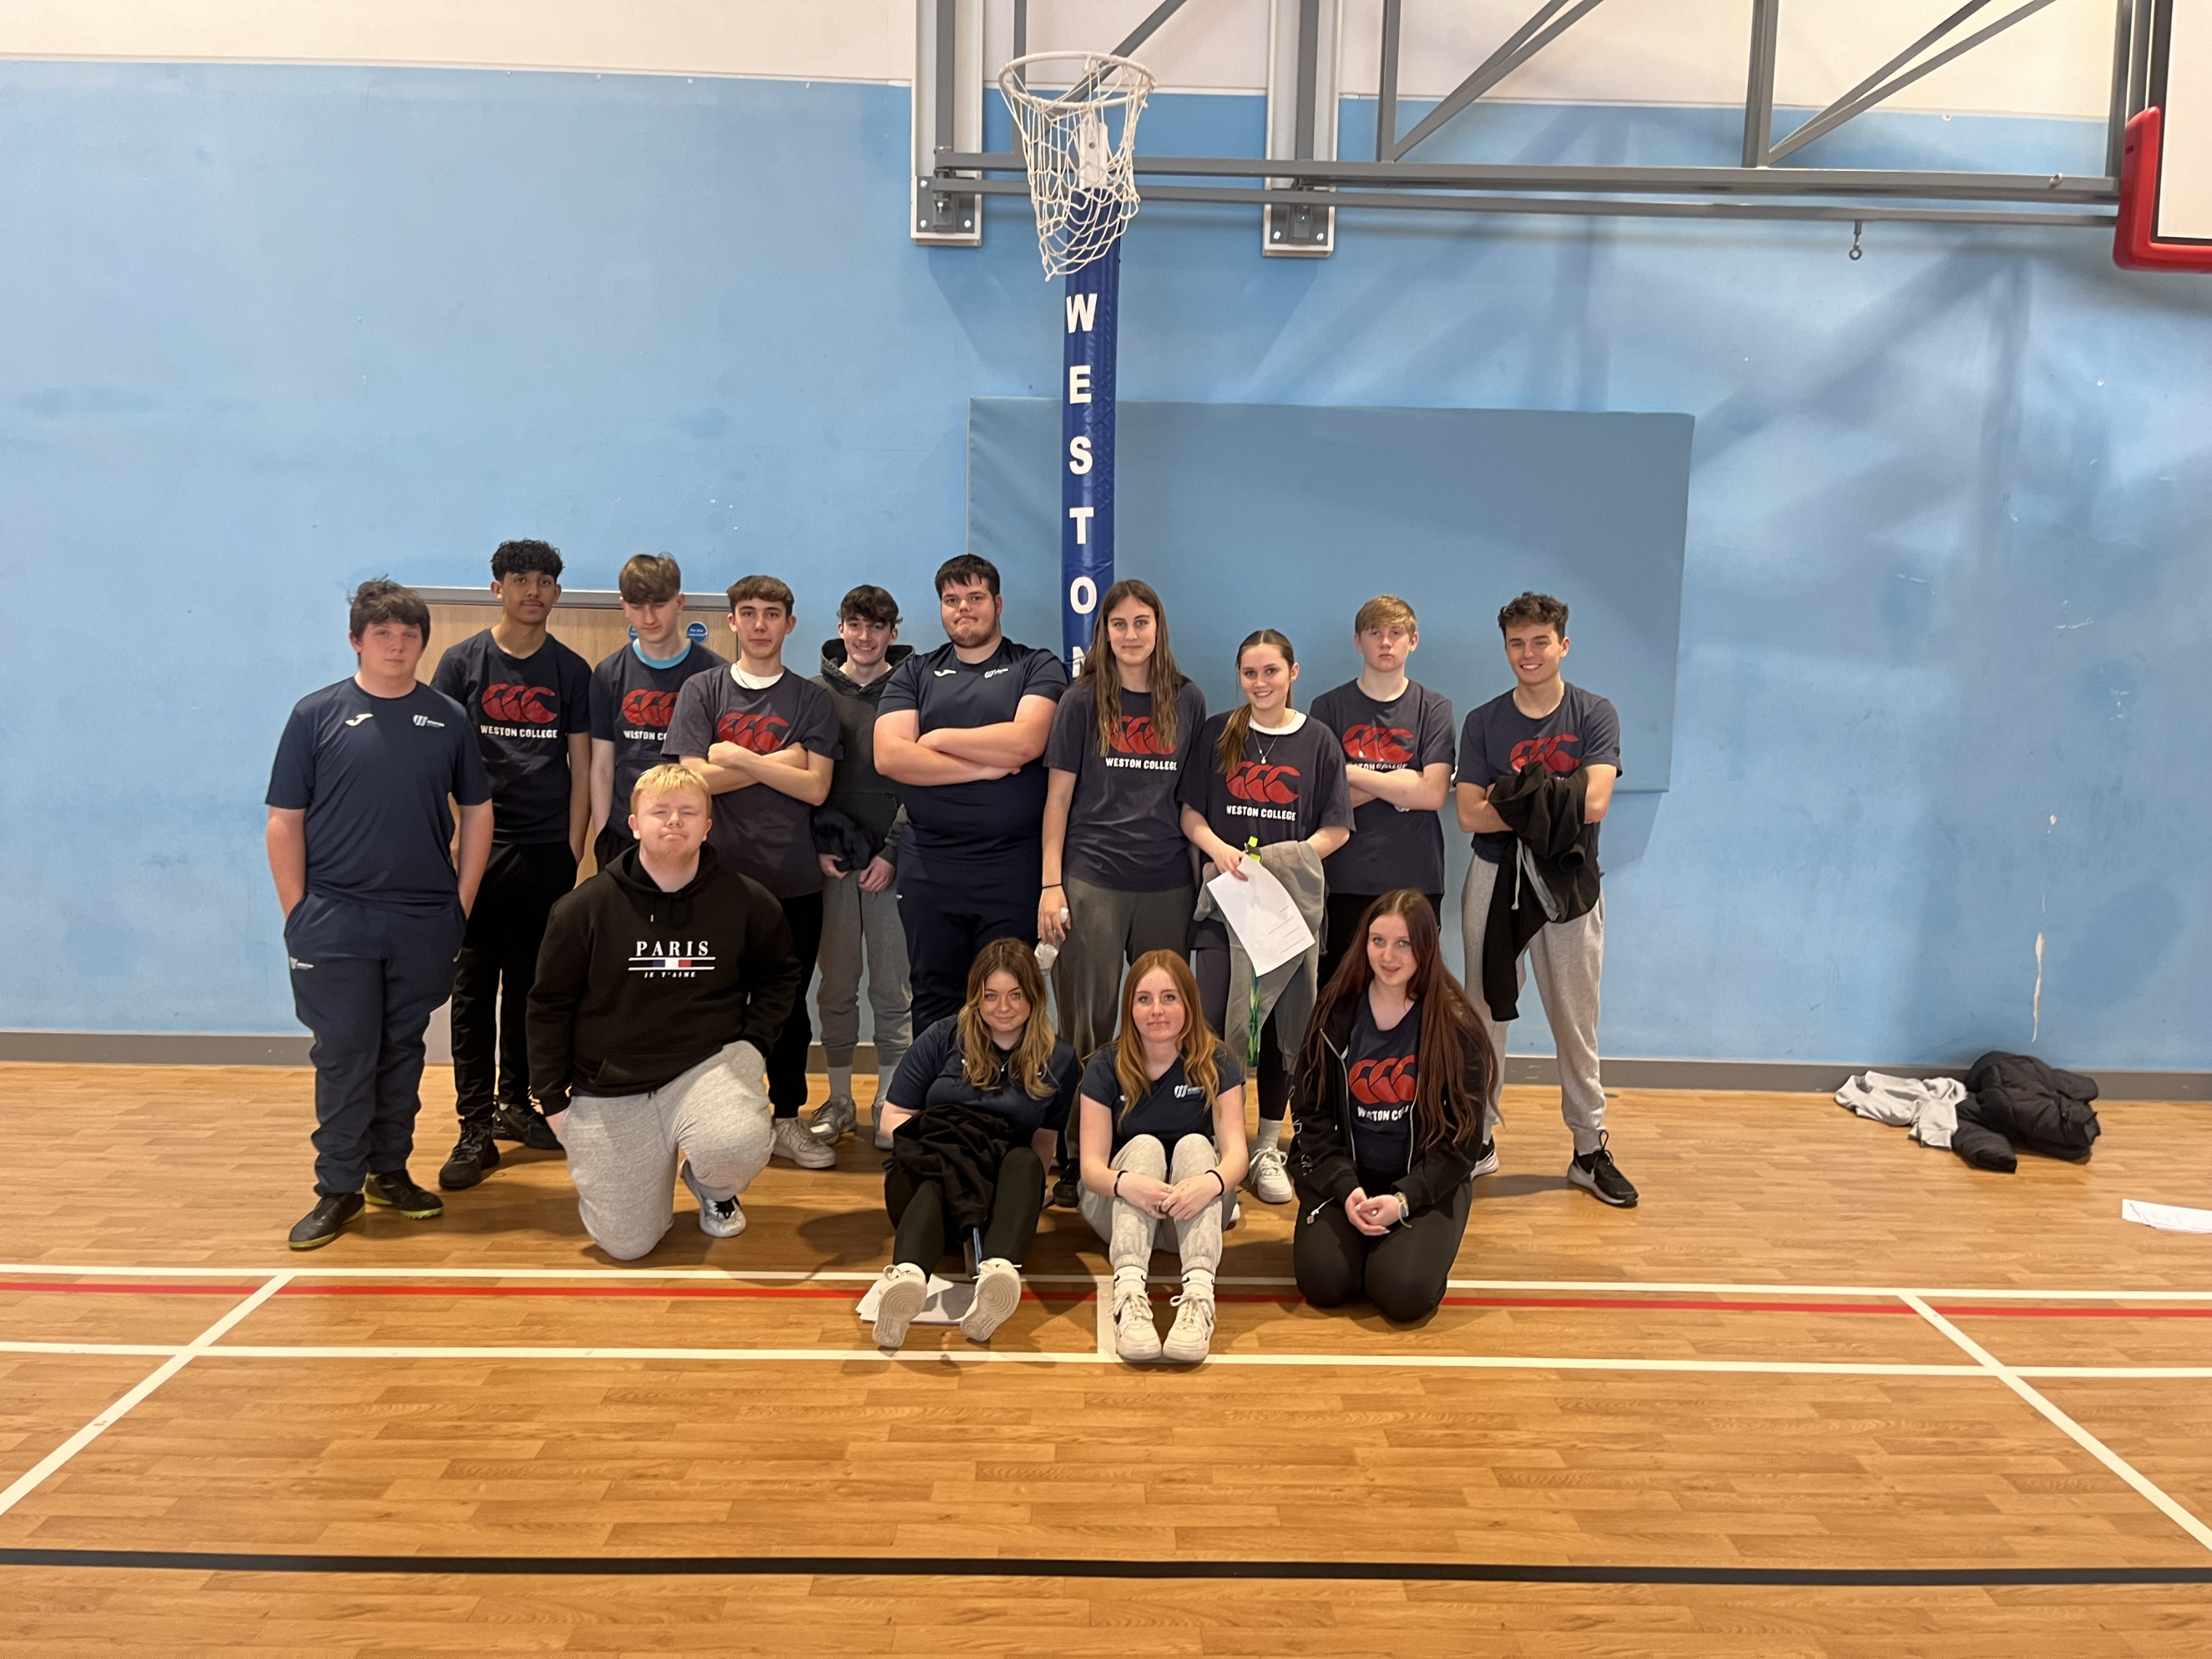 Our level 2 sports students posing for a picture in our sports hall